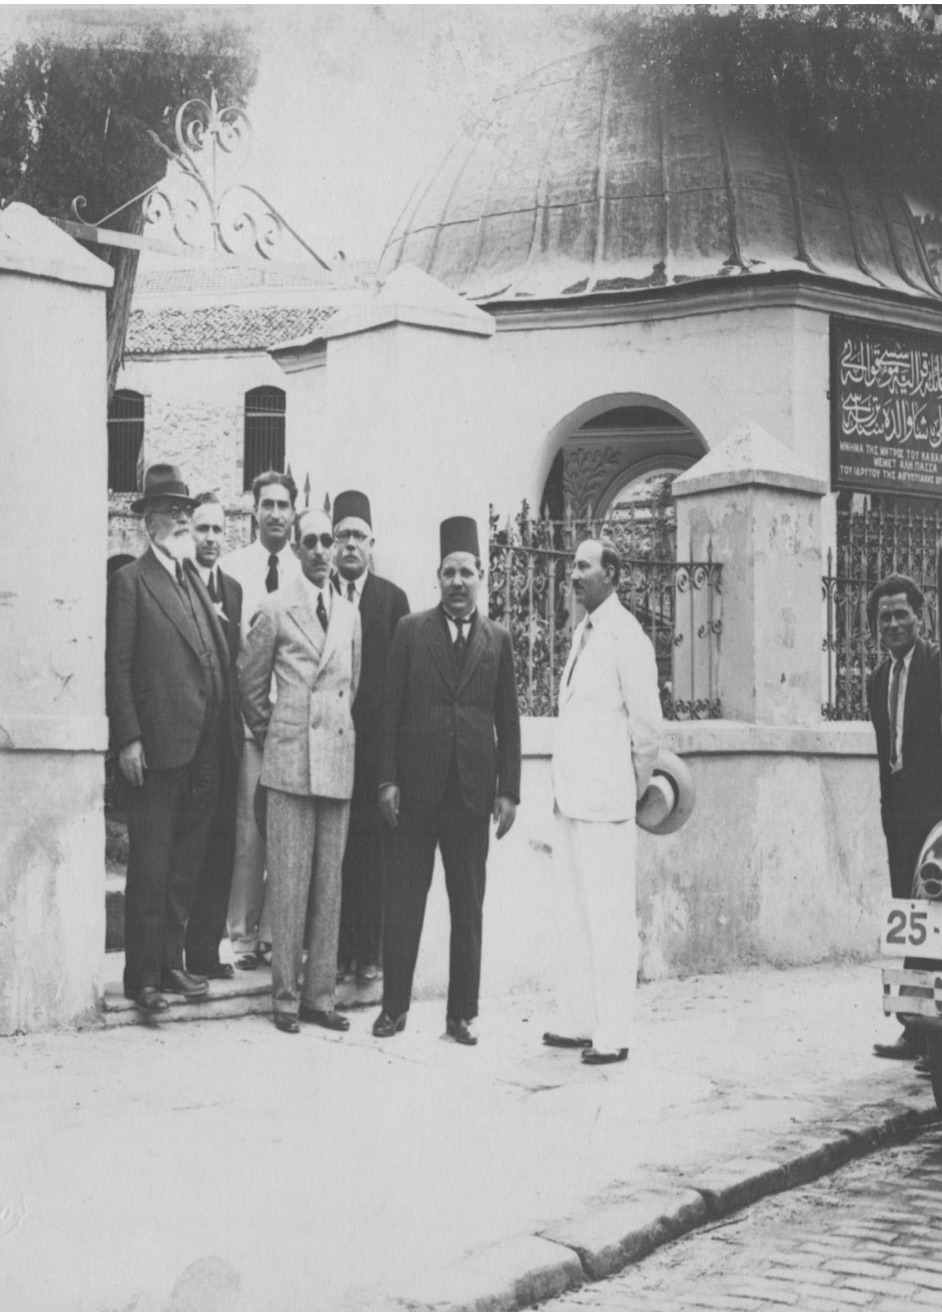 A group of officials, including the sculptor Konstantinos Dimitriadis (in white suit) and the architect of the Egyptian Royal Court, Ernesto Verucci Bey (with the white beard), outside the mausoleum of Mohammed Ali’s mother. Kavala, c. 1932. I. Kapaios’ Archive